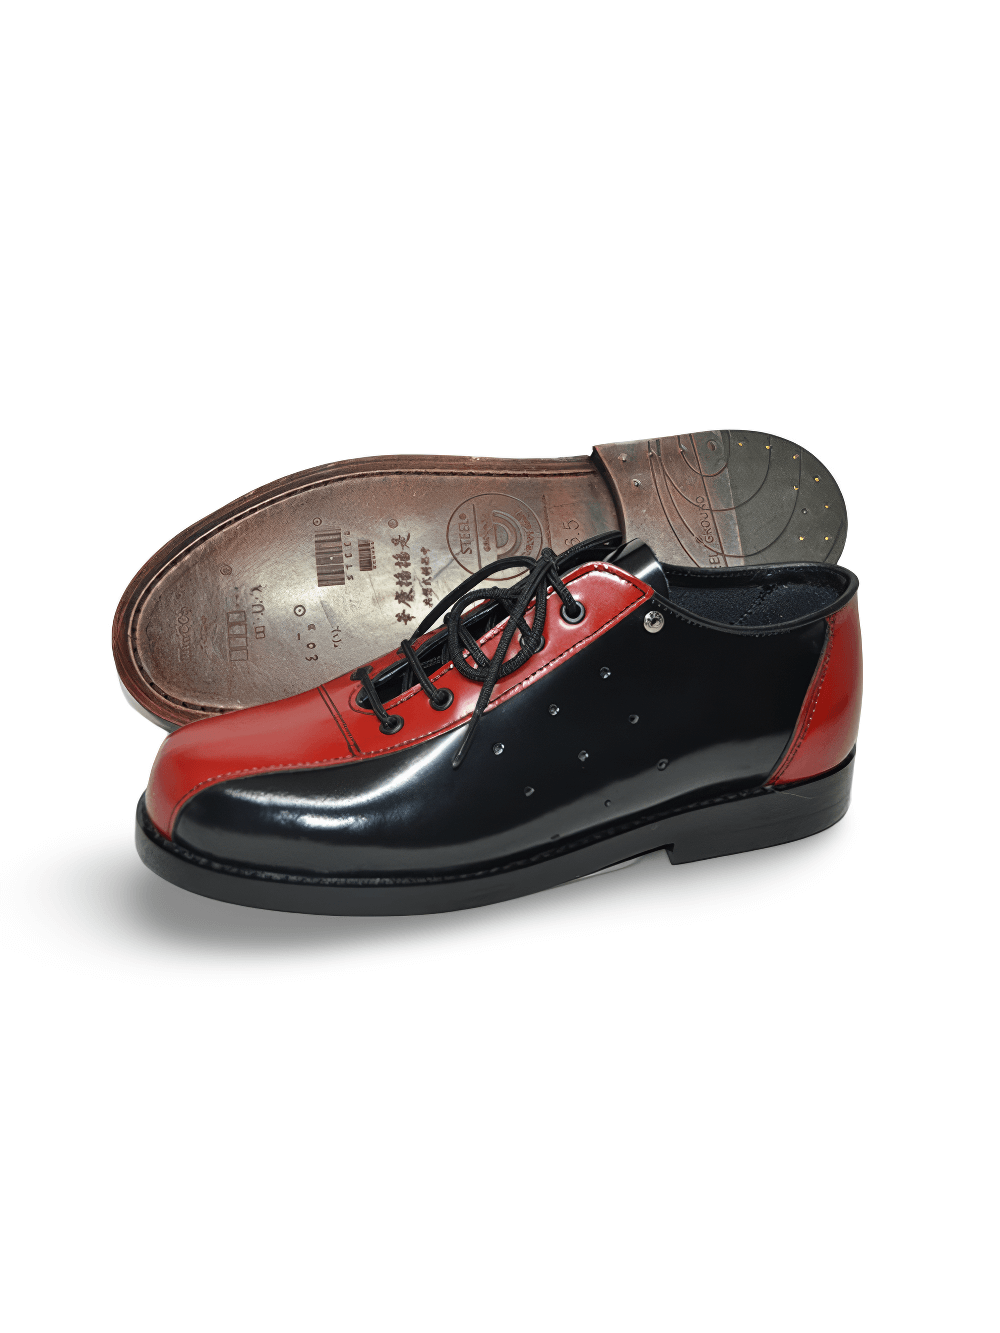 Unisex Classic Lace-Up Bowling Footwear with Flat Sole